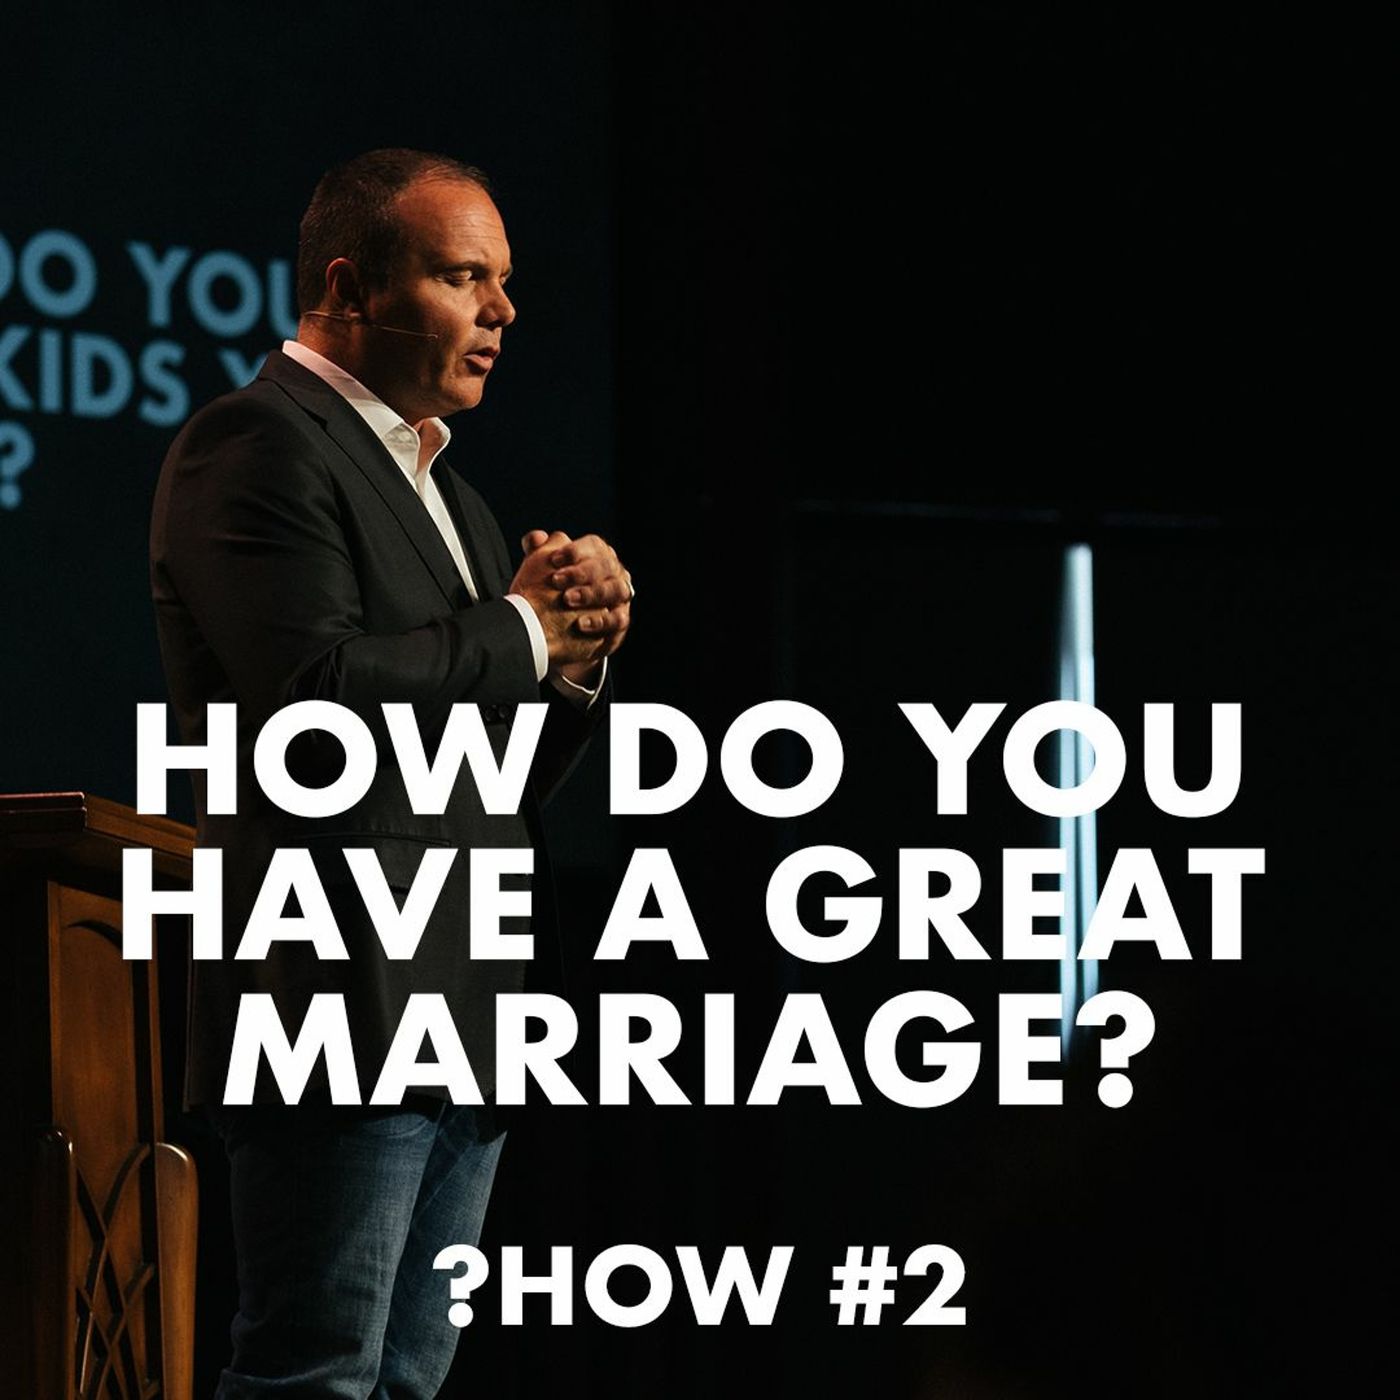 Proverbs #2 - How do you have a great marriage?